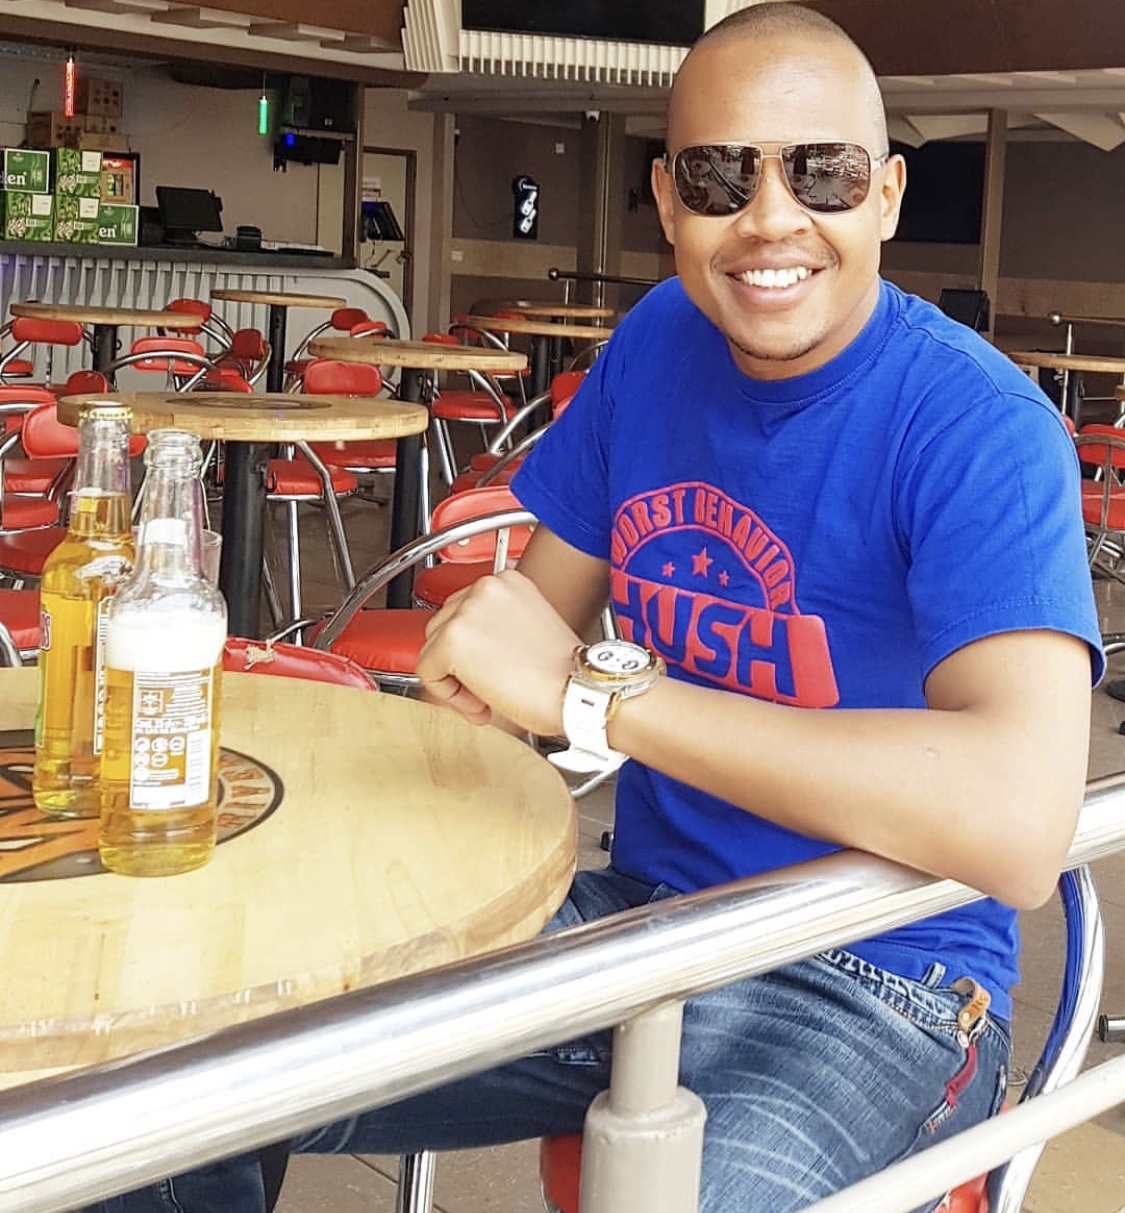 It’s a trap!DNG warns Nyashinski against working with his new wife